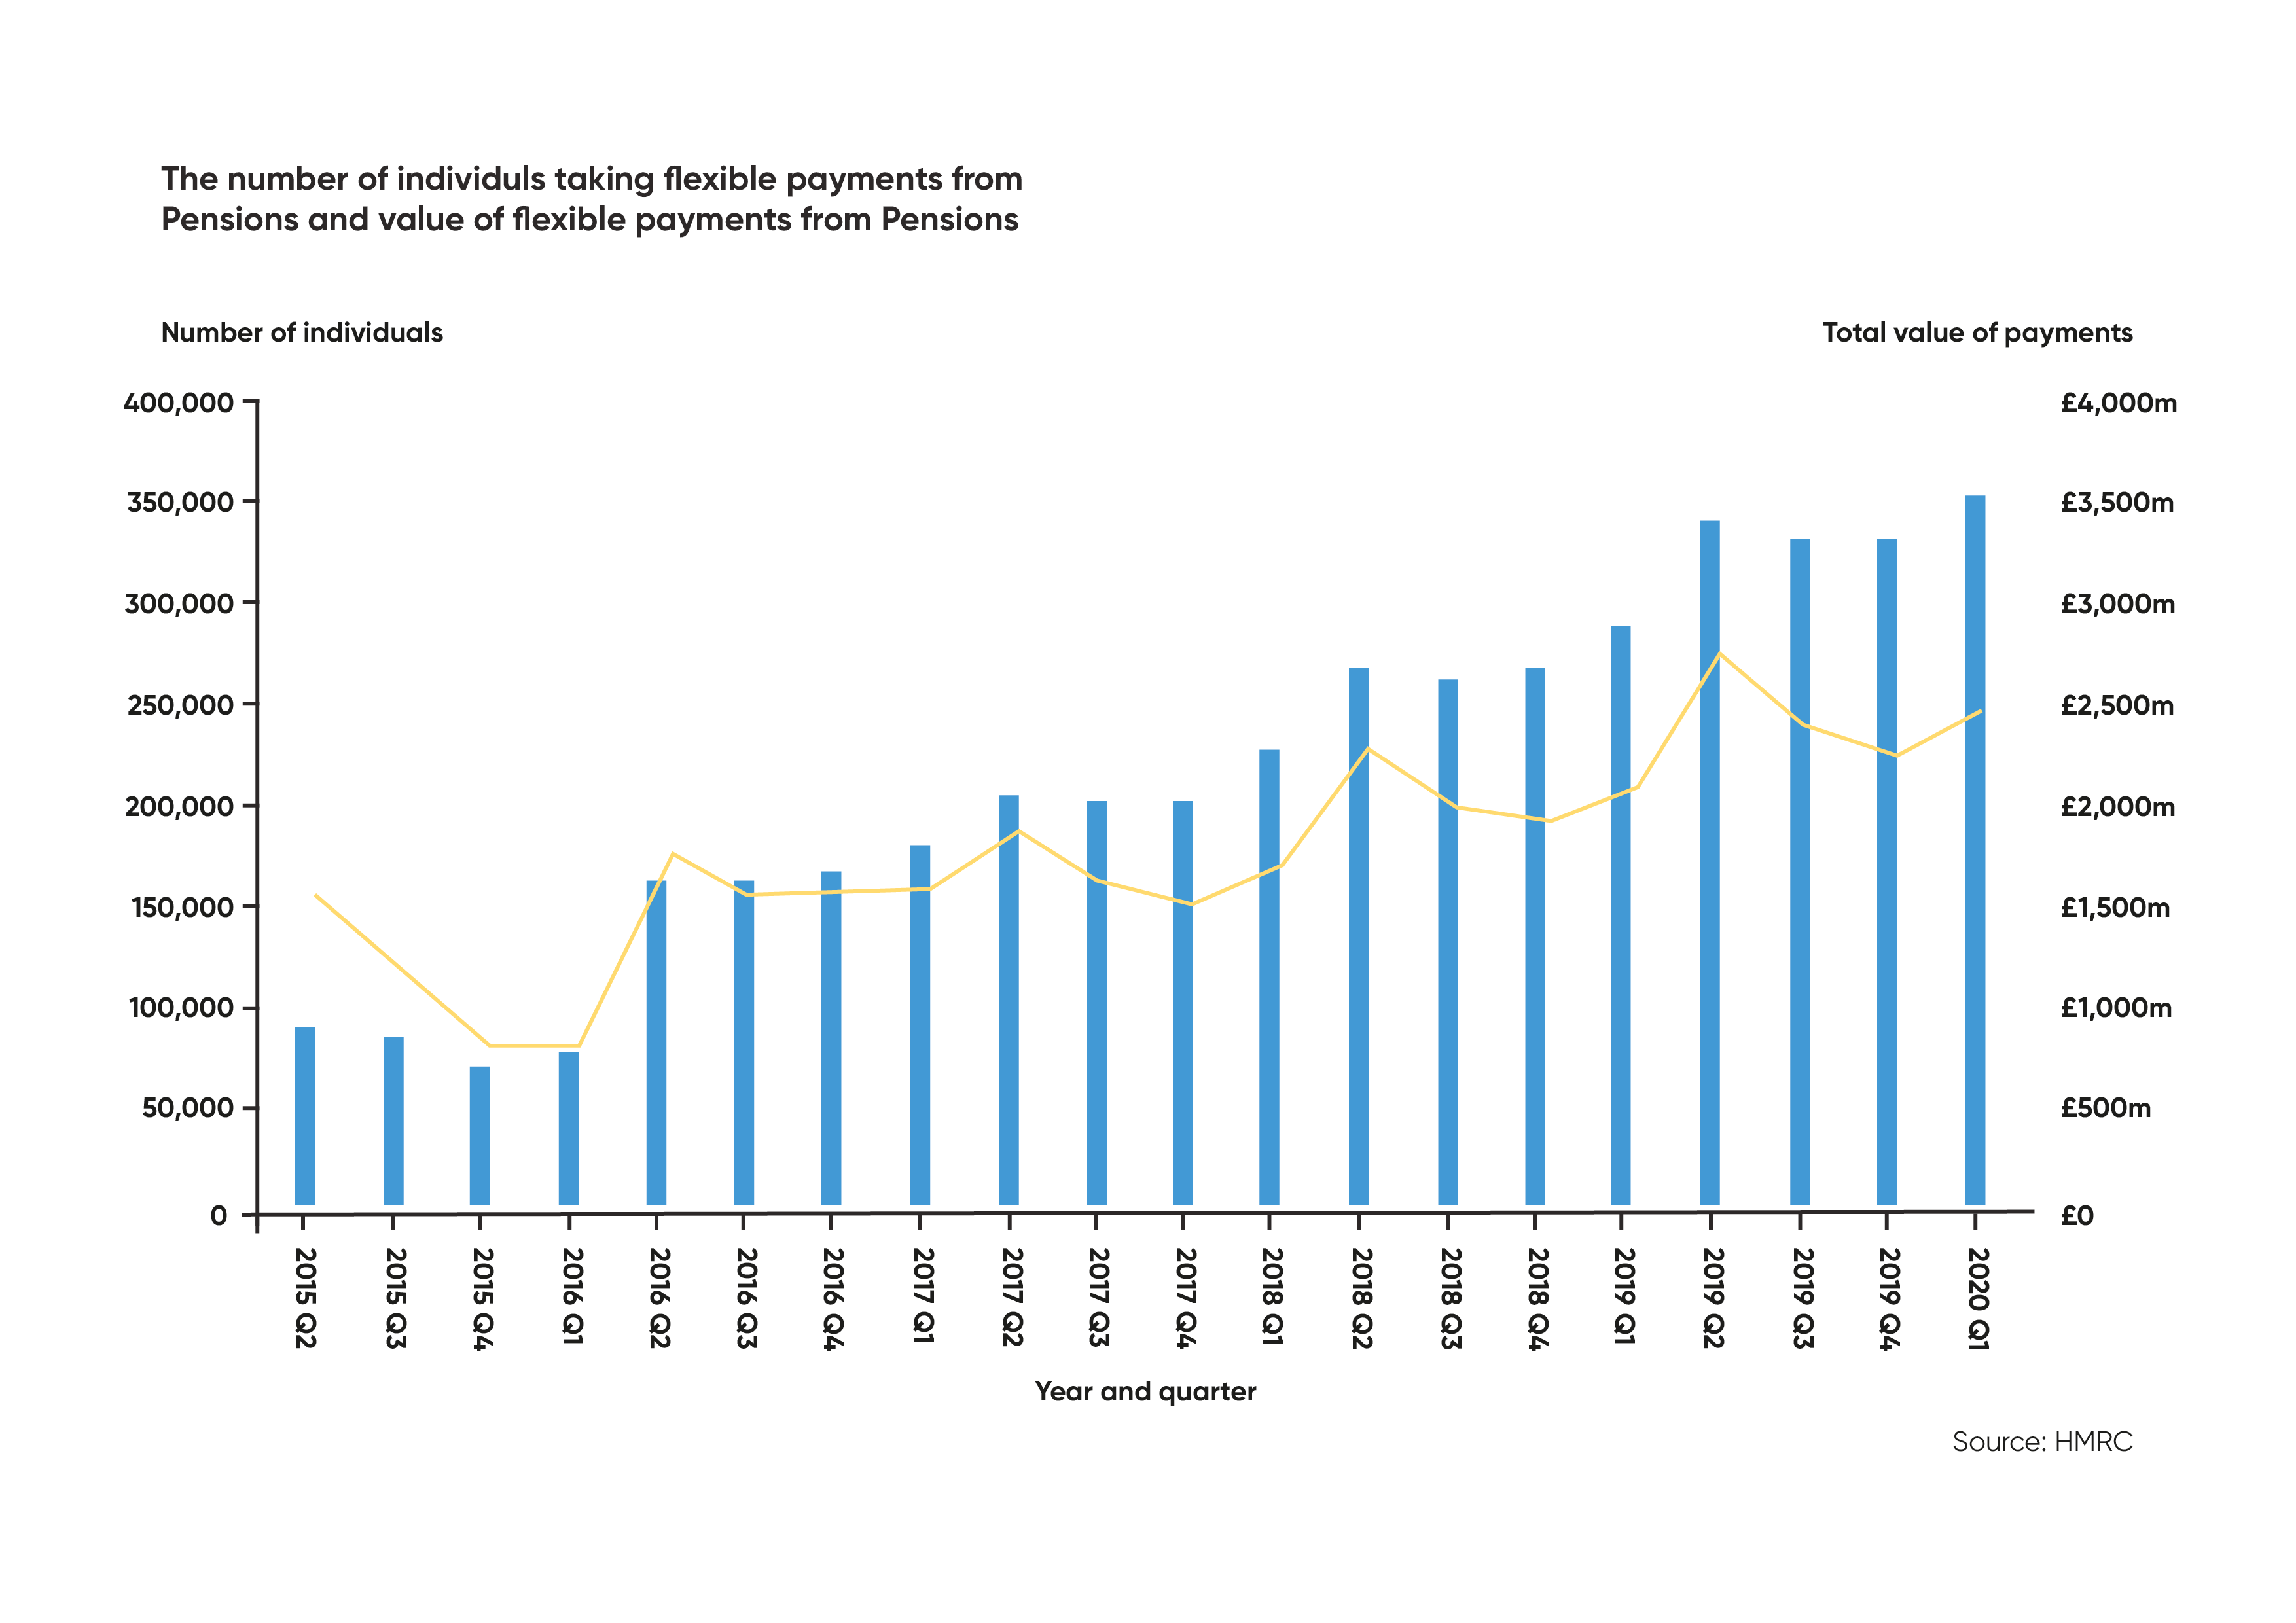 Number of individuals taking flexible payments from pensions and value of flexible payments from pensions - graph